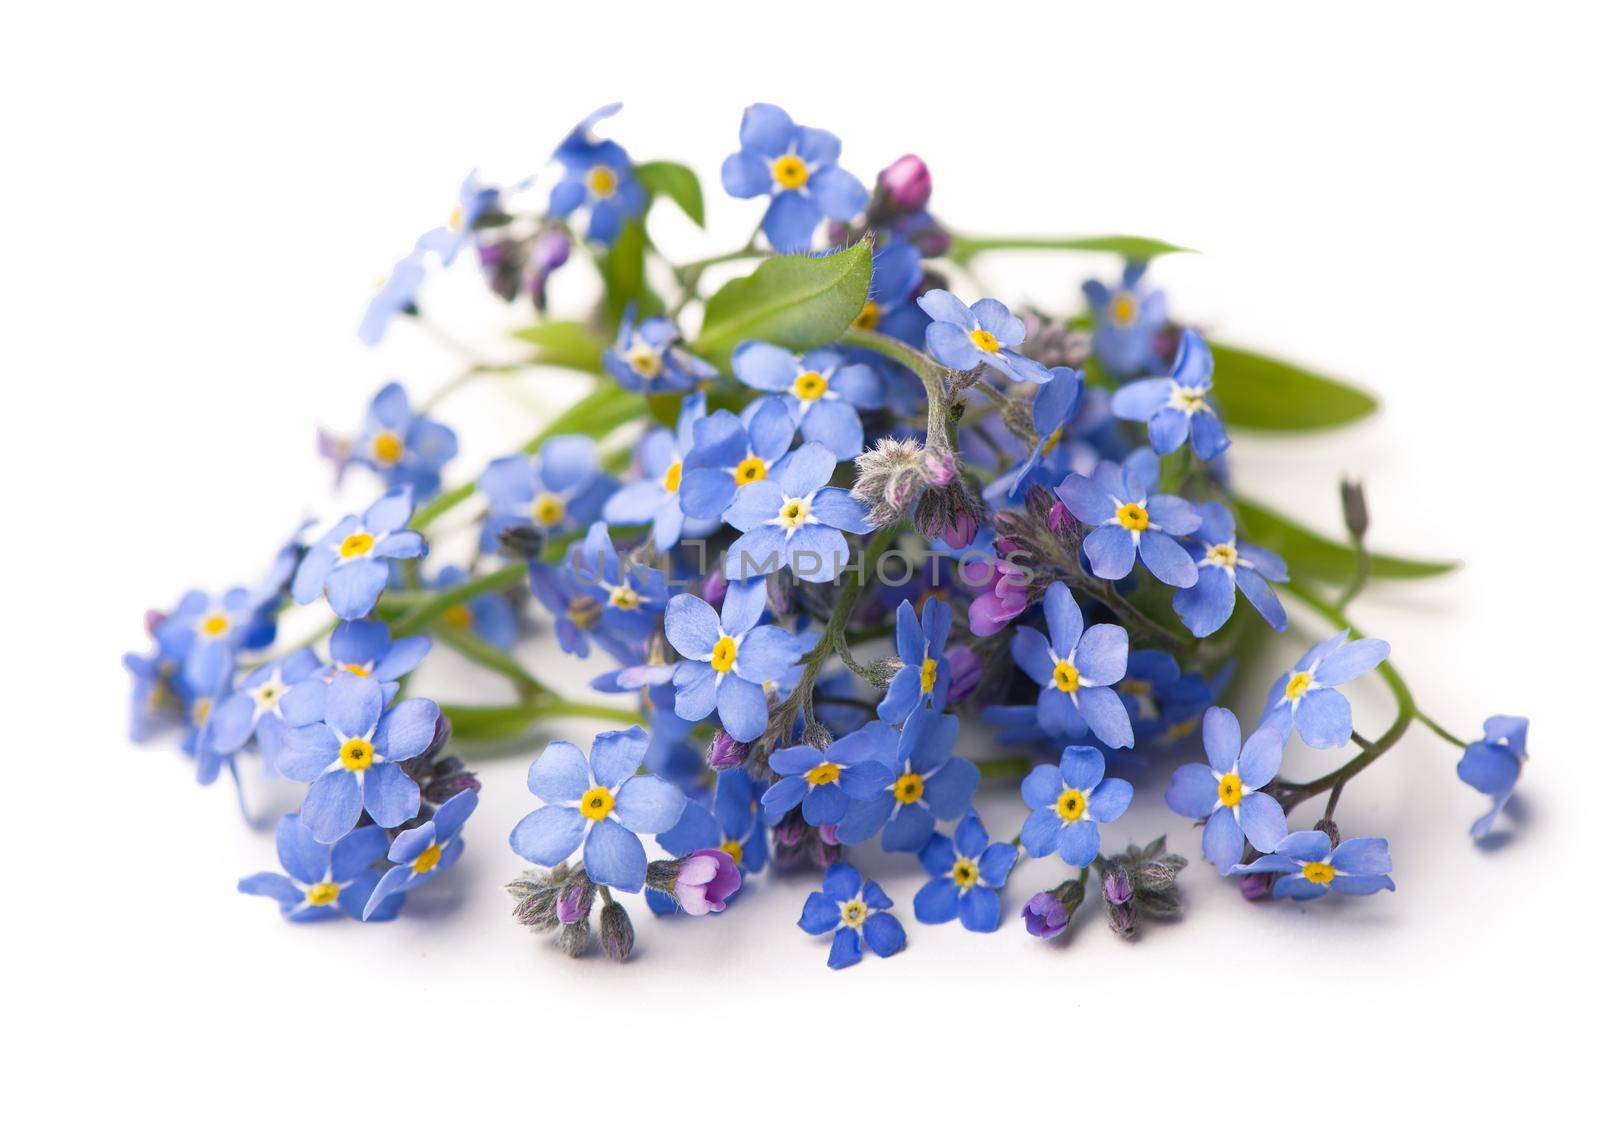 Forget me not, little flowers in heart shape, isolated on white. by aprilphoto